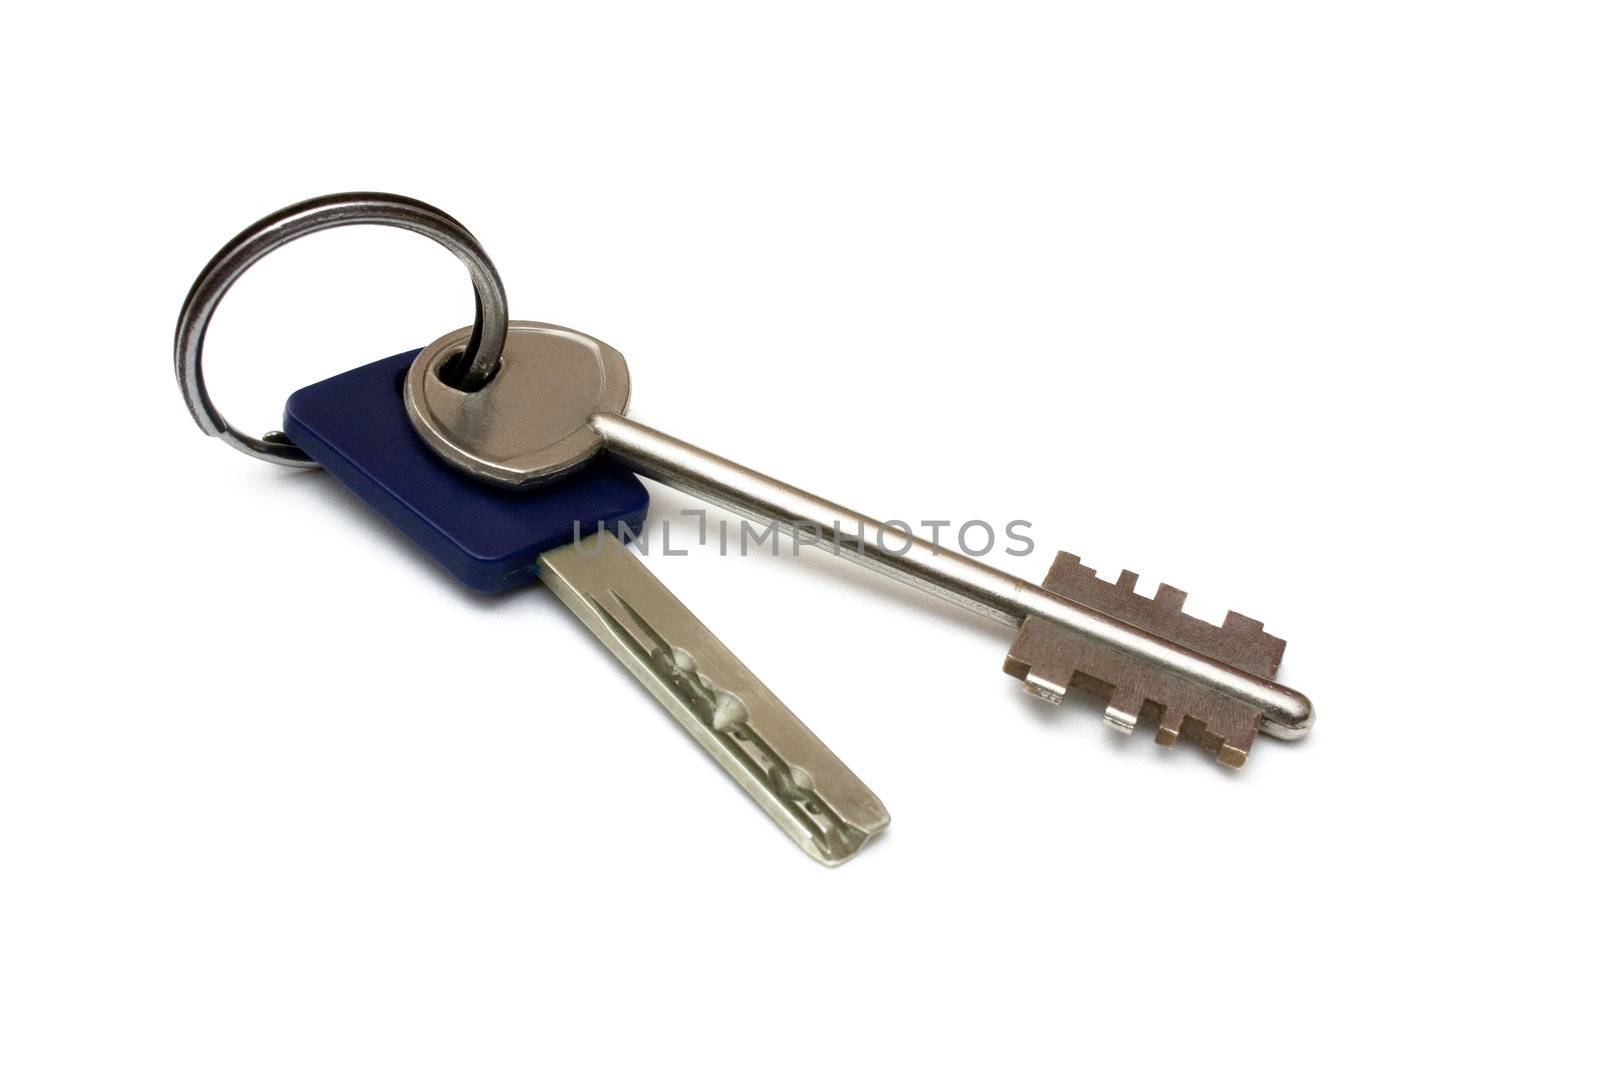 Two keys isolated on white